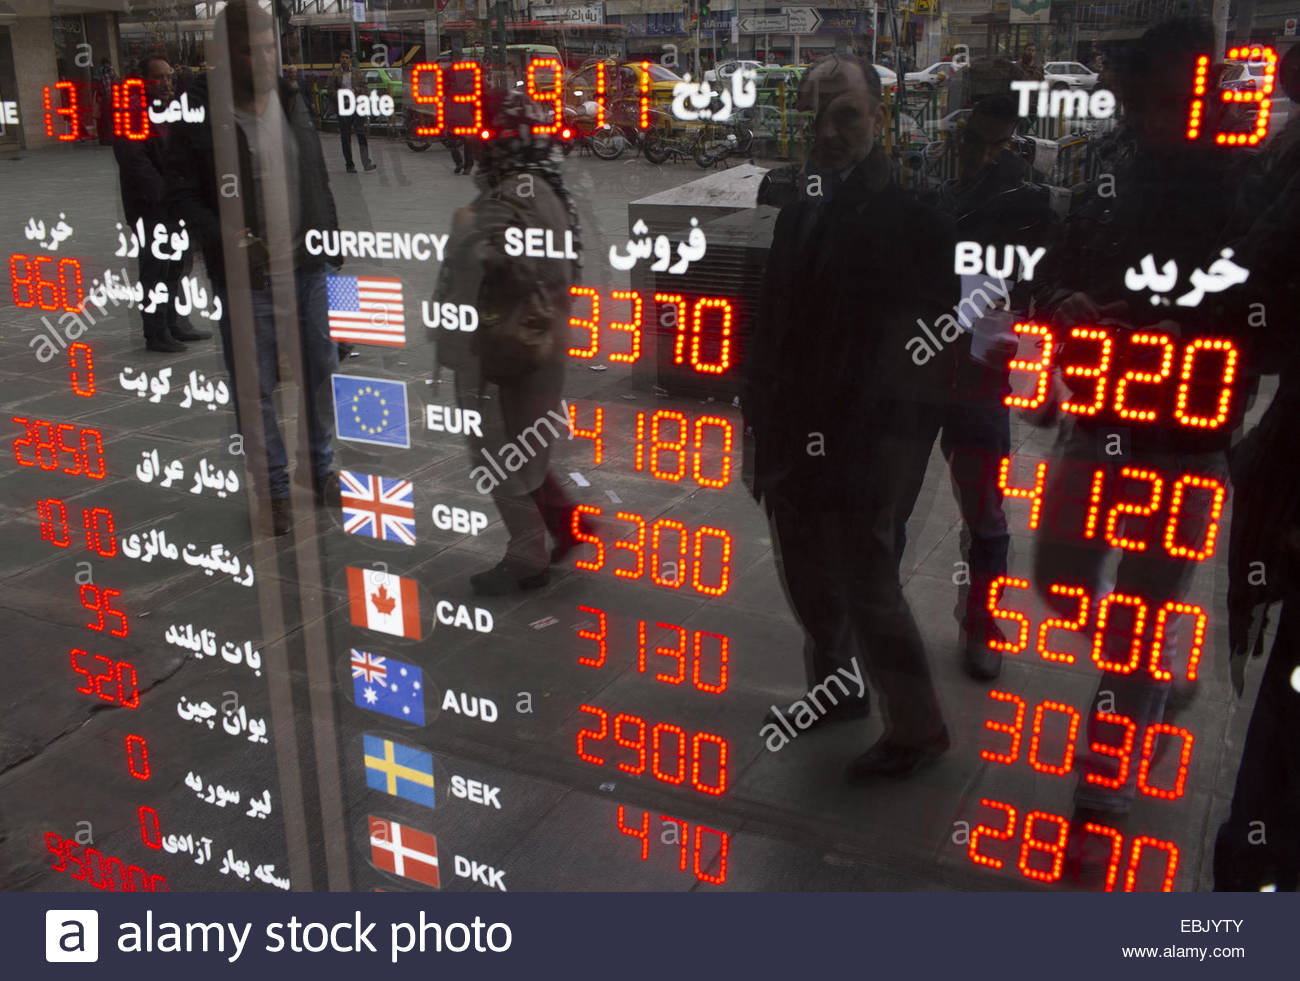 Currency Exchange in Iran